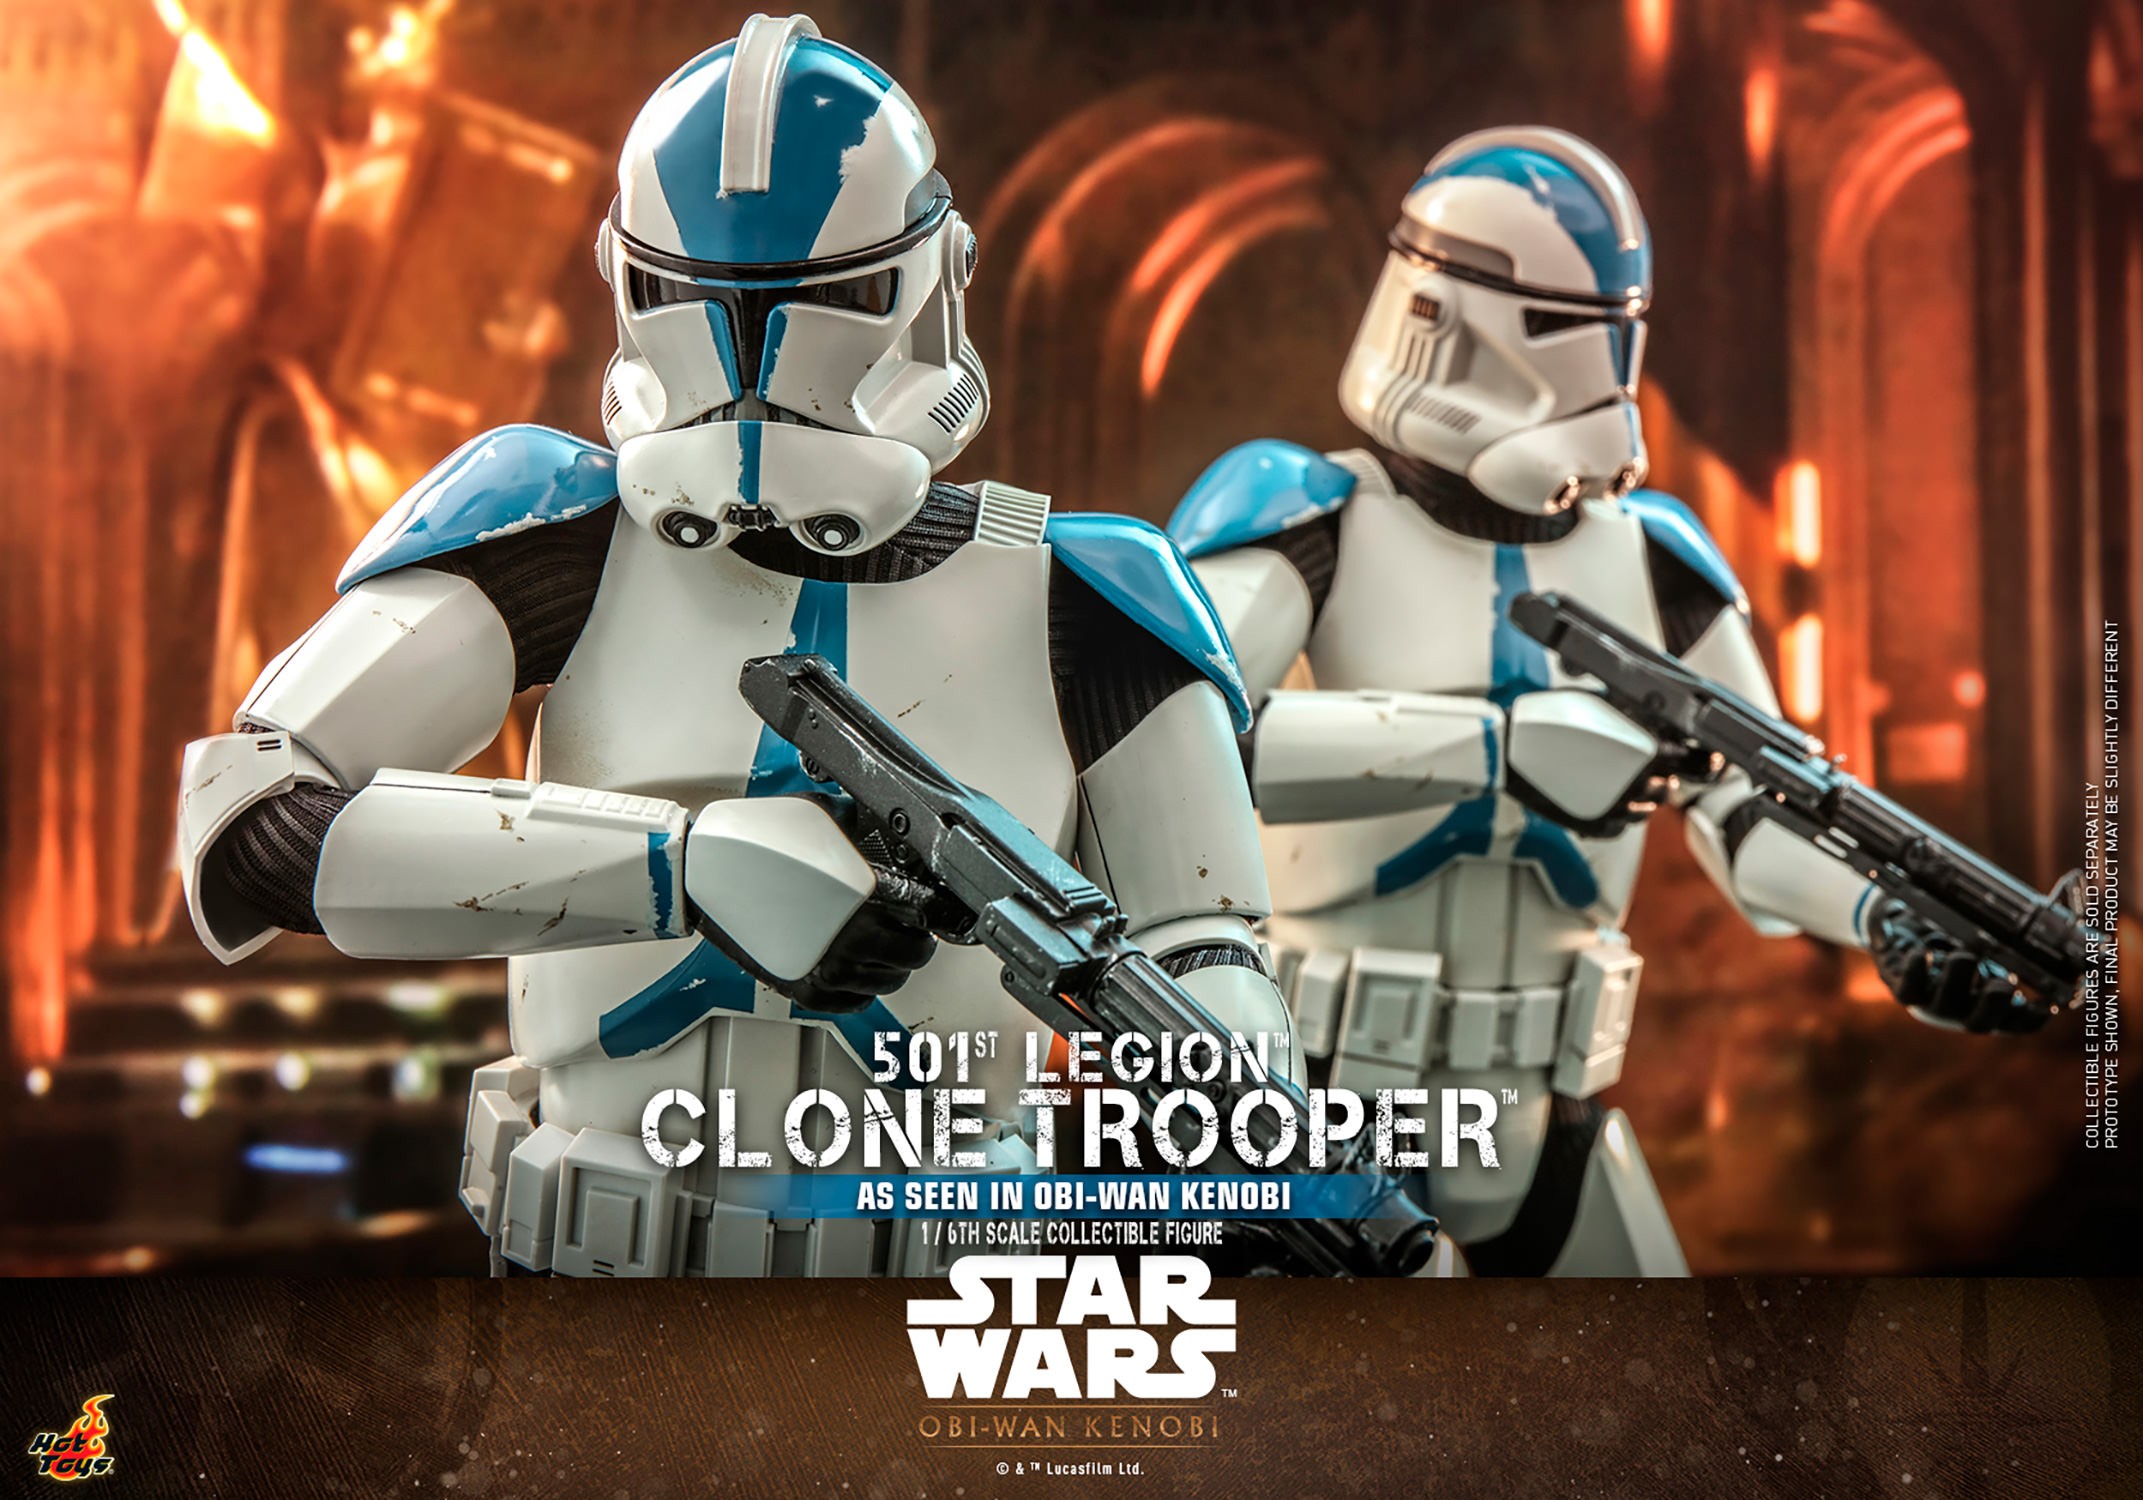 501st Legion Clone Trooper Sixth Scale Figure by Hot Toys